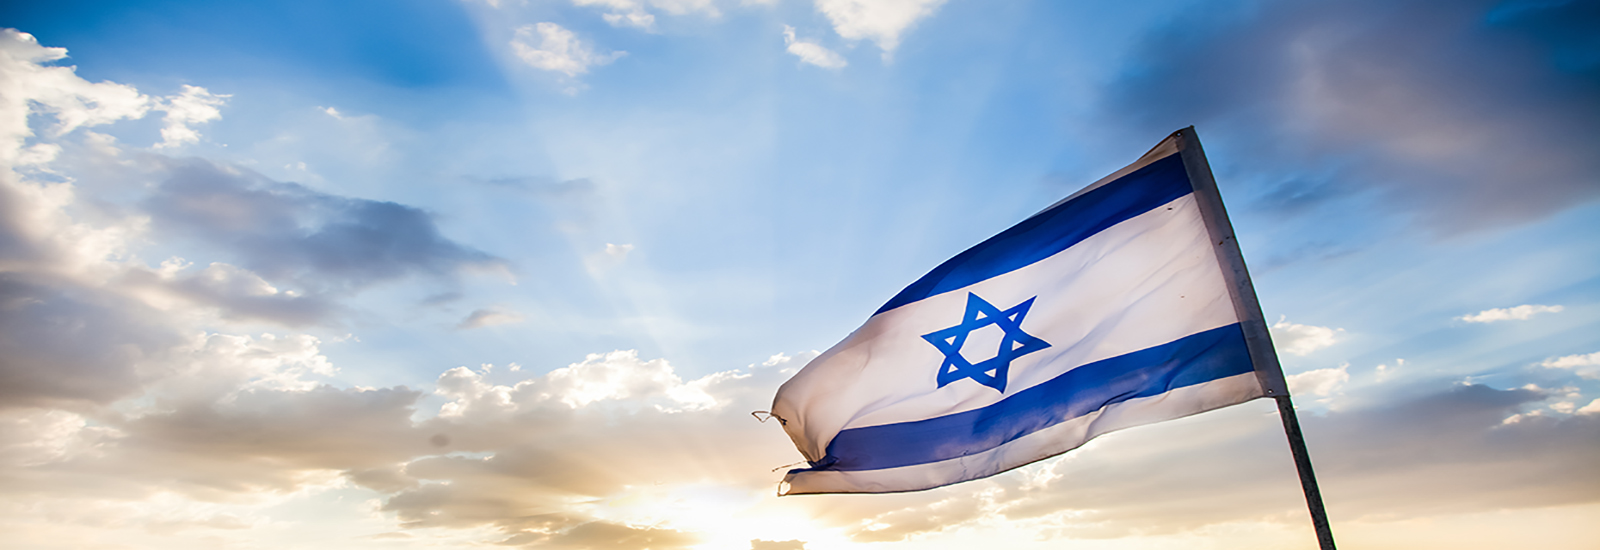 This is a stock photo. The flag of Israel.